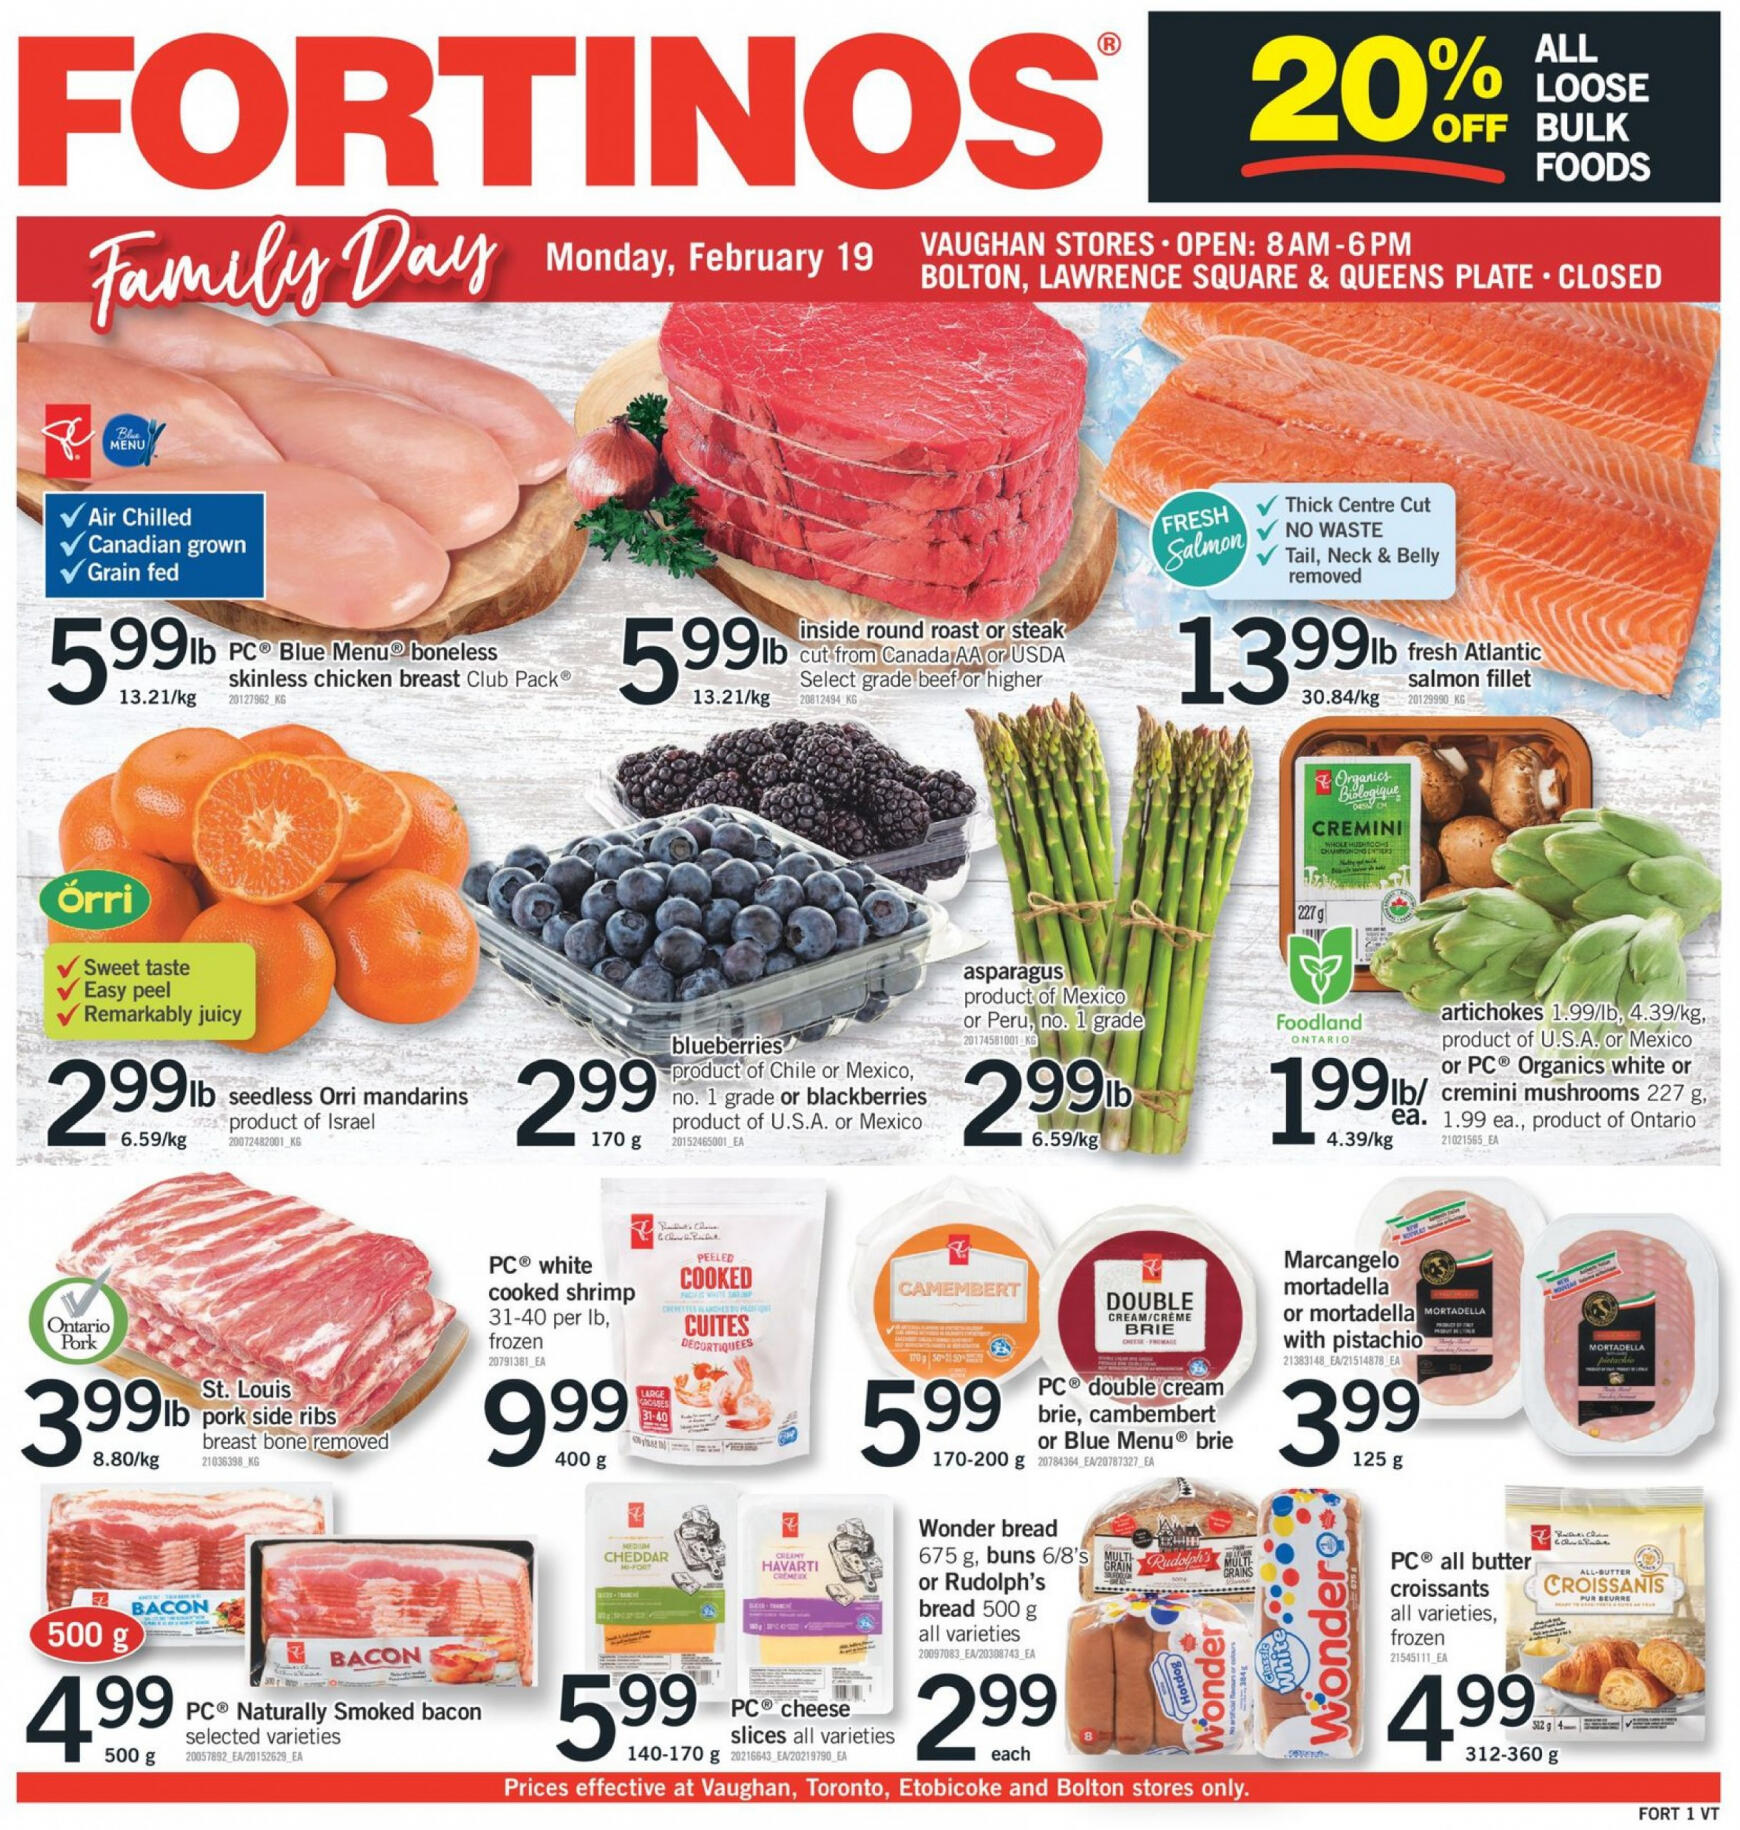 fortinos - Fortinos valid from 15.02.2024 - page: 1